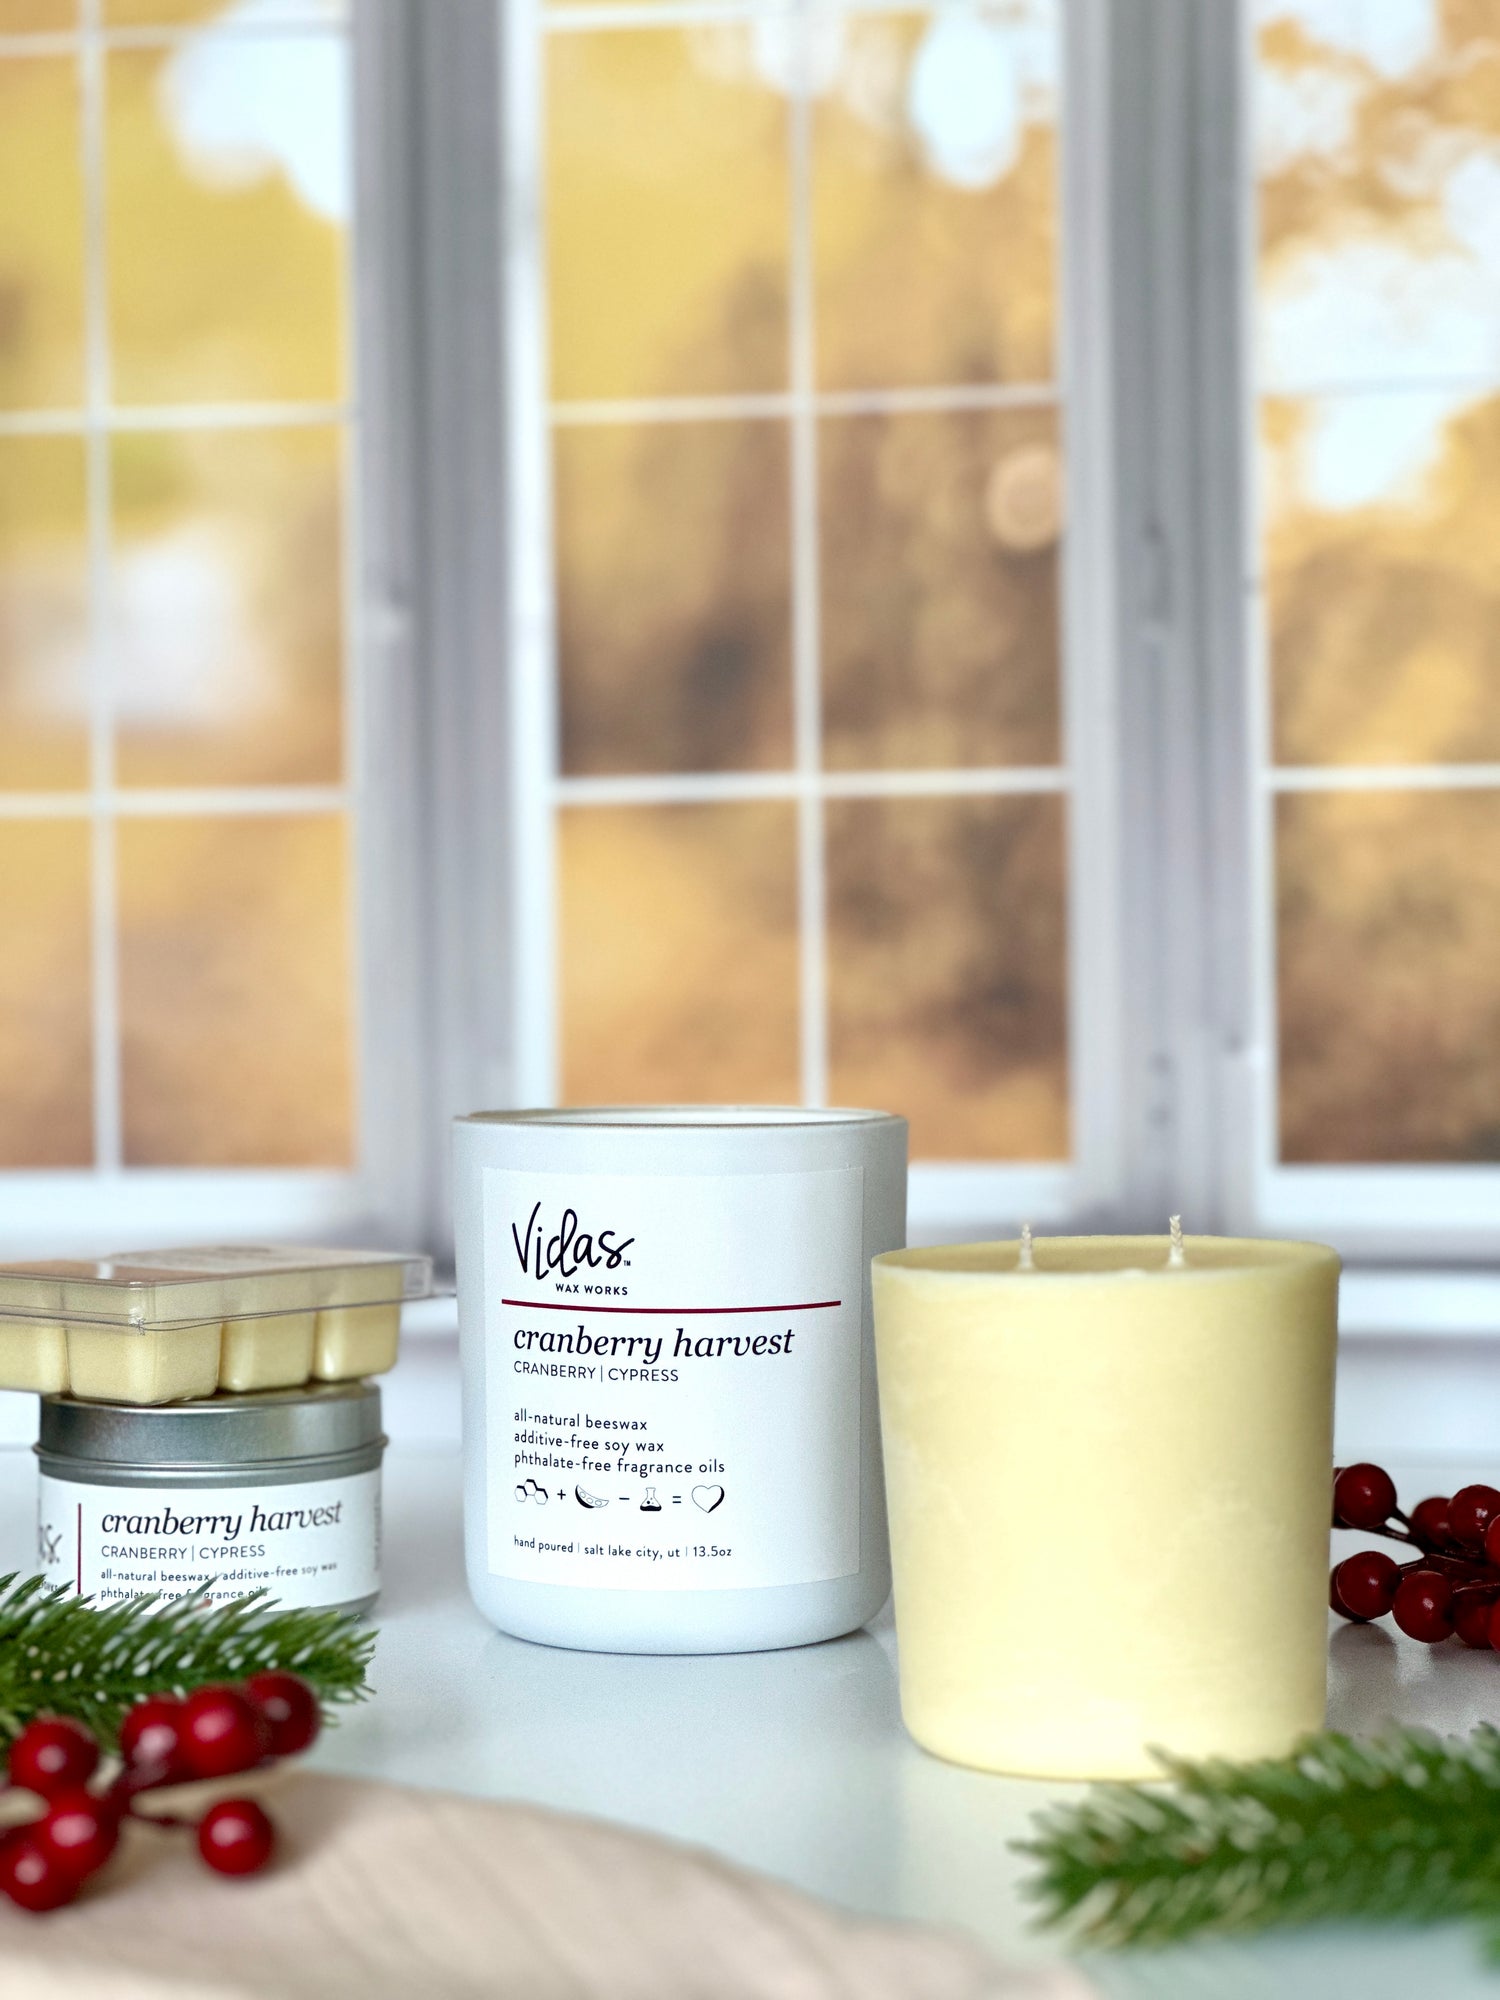 Embrace the autumn ambience with our “Cranberry Harvest” scent, a delightful blend of cranberry and cypress. Against a backdrop of blurred fall-colored leaves outside a window, the collection features a range of offerings: a 13.5oz candle in a chic matte white jar, a 13.5oz candle refill, a compact 3.5oz candle tin, and dainty 2.5oz wax melts. A symphony of scents to elevate your seasonal moments.